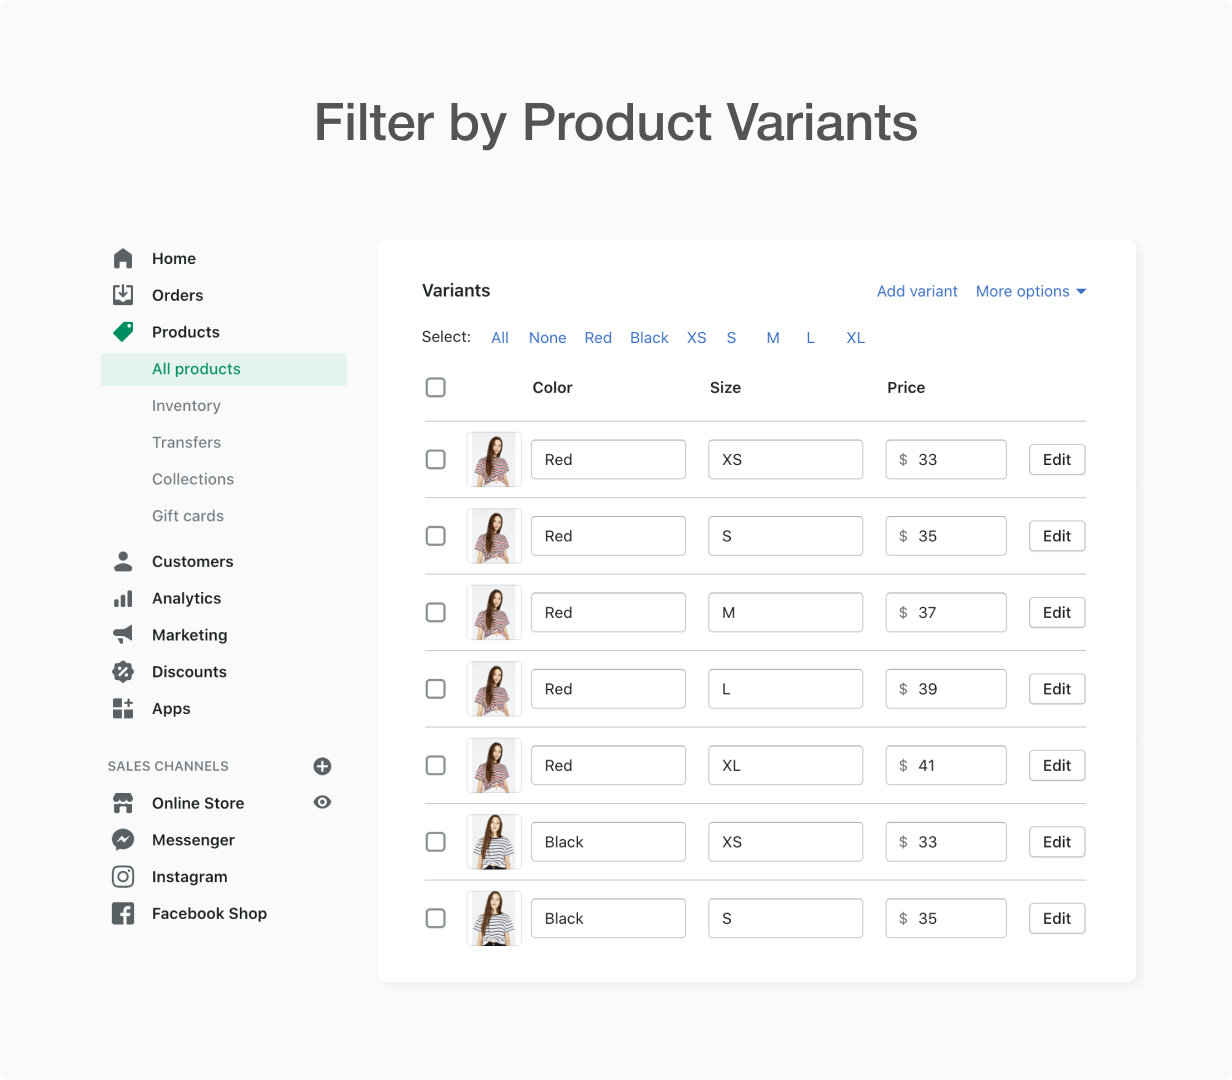 Filter by Product variants